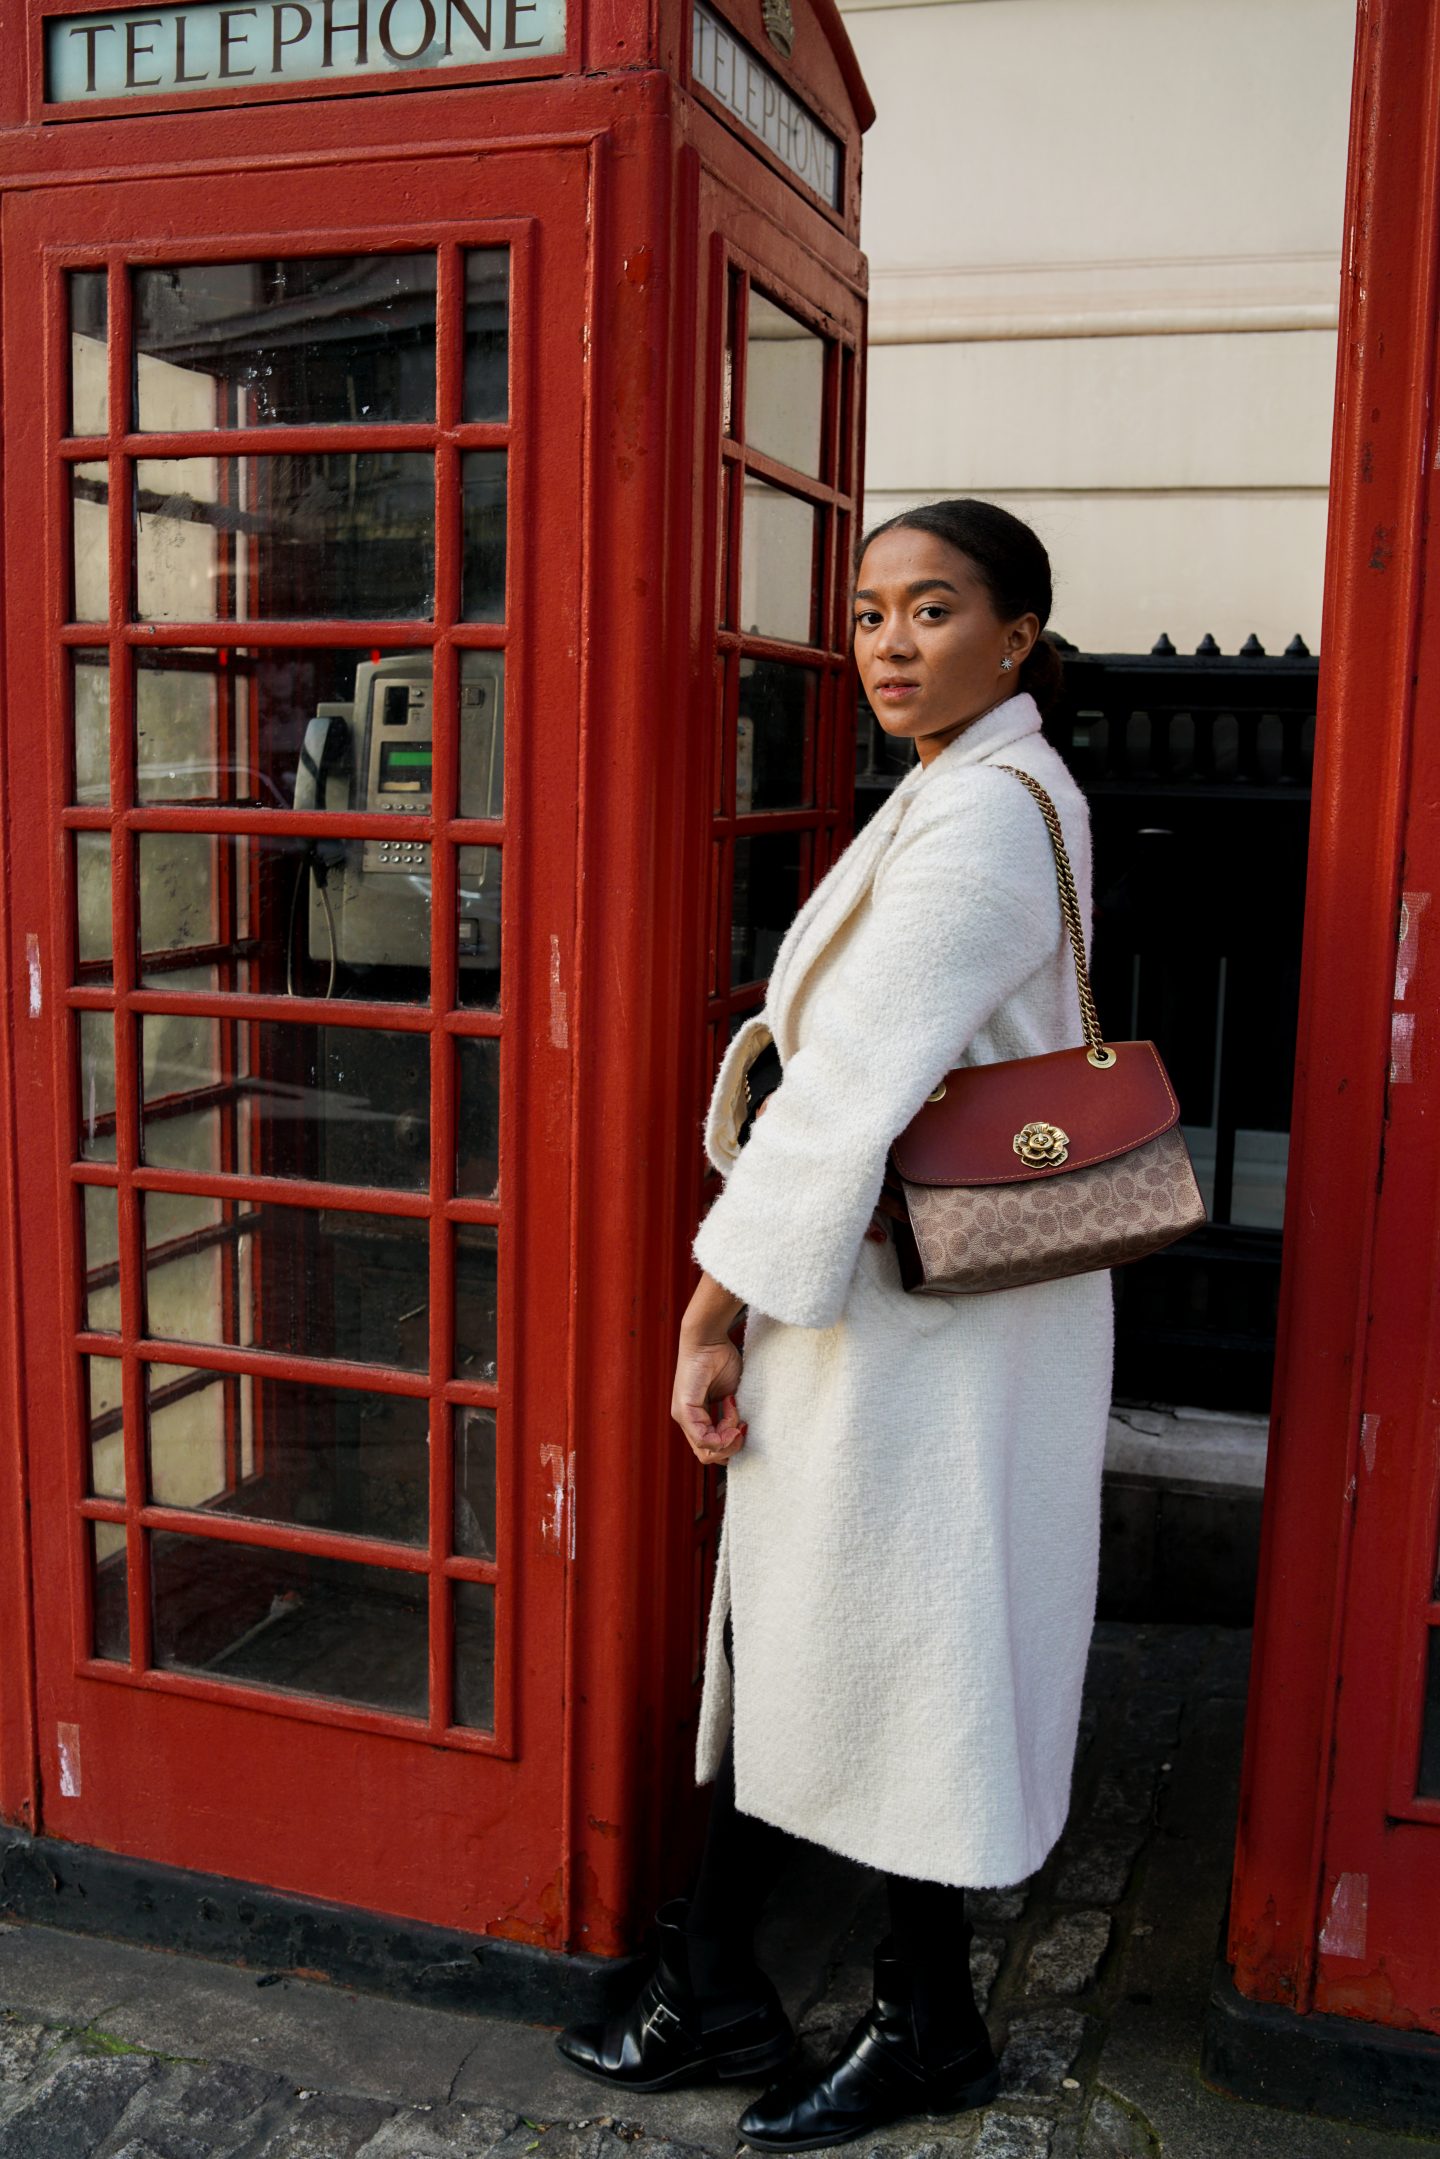 London Fashion Blogger Red Phone Booth White Winter Coat 